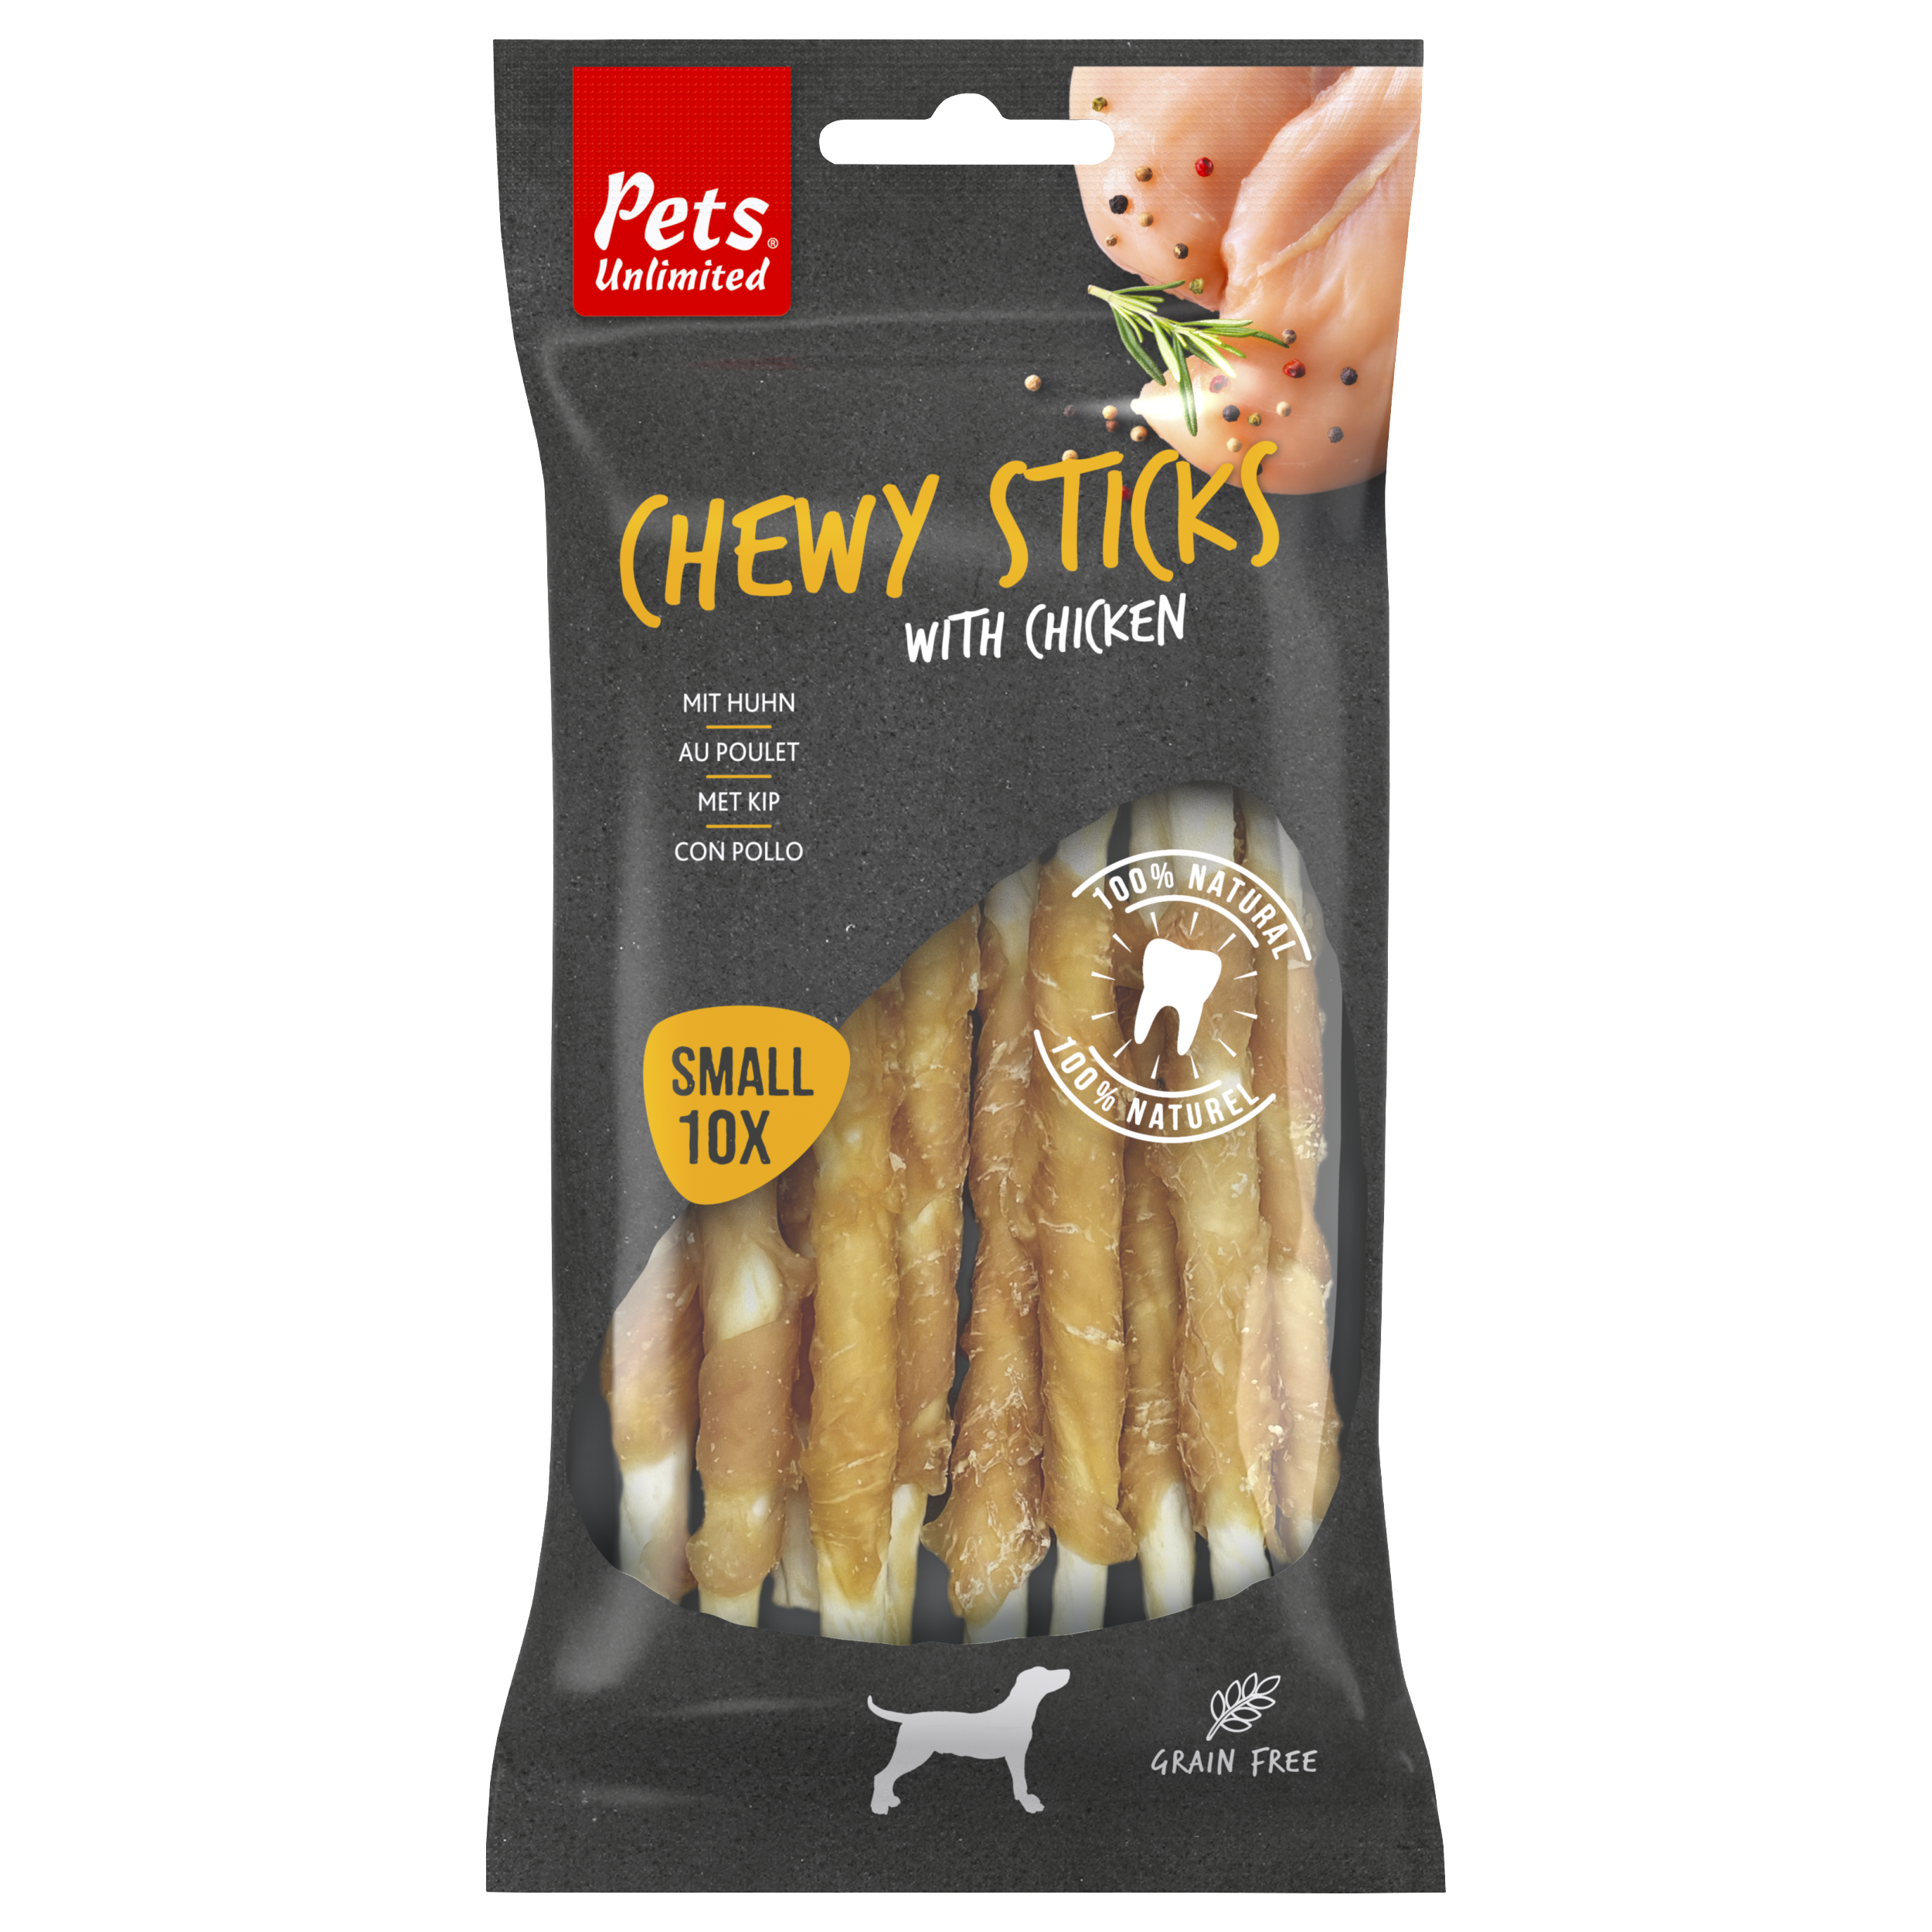 Chewy sticks with chicken small, 10 pieces